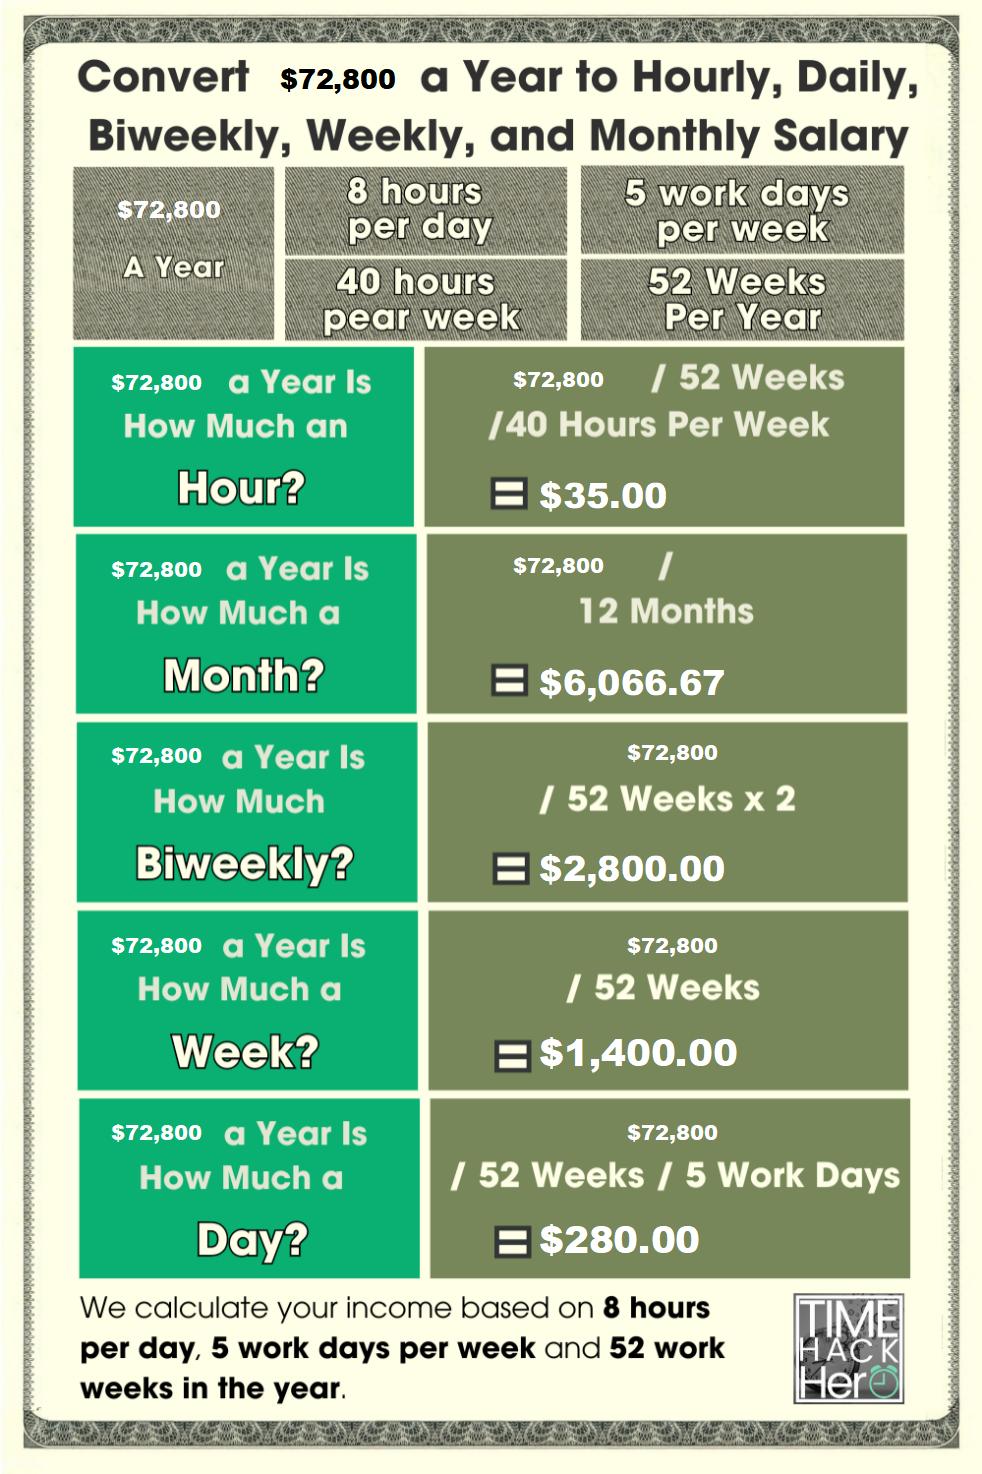 Convert $72800 a Year to Hourly, Daily, Biweekly, Weekly, and Monthly Salary